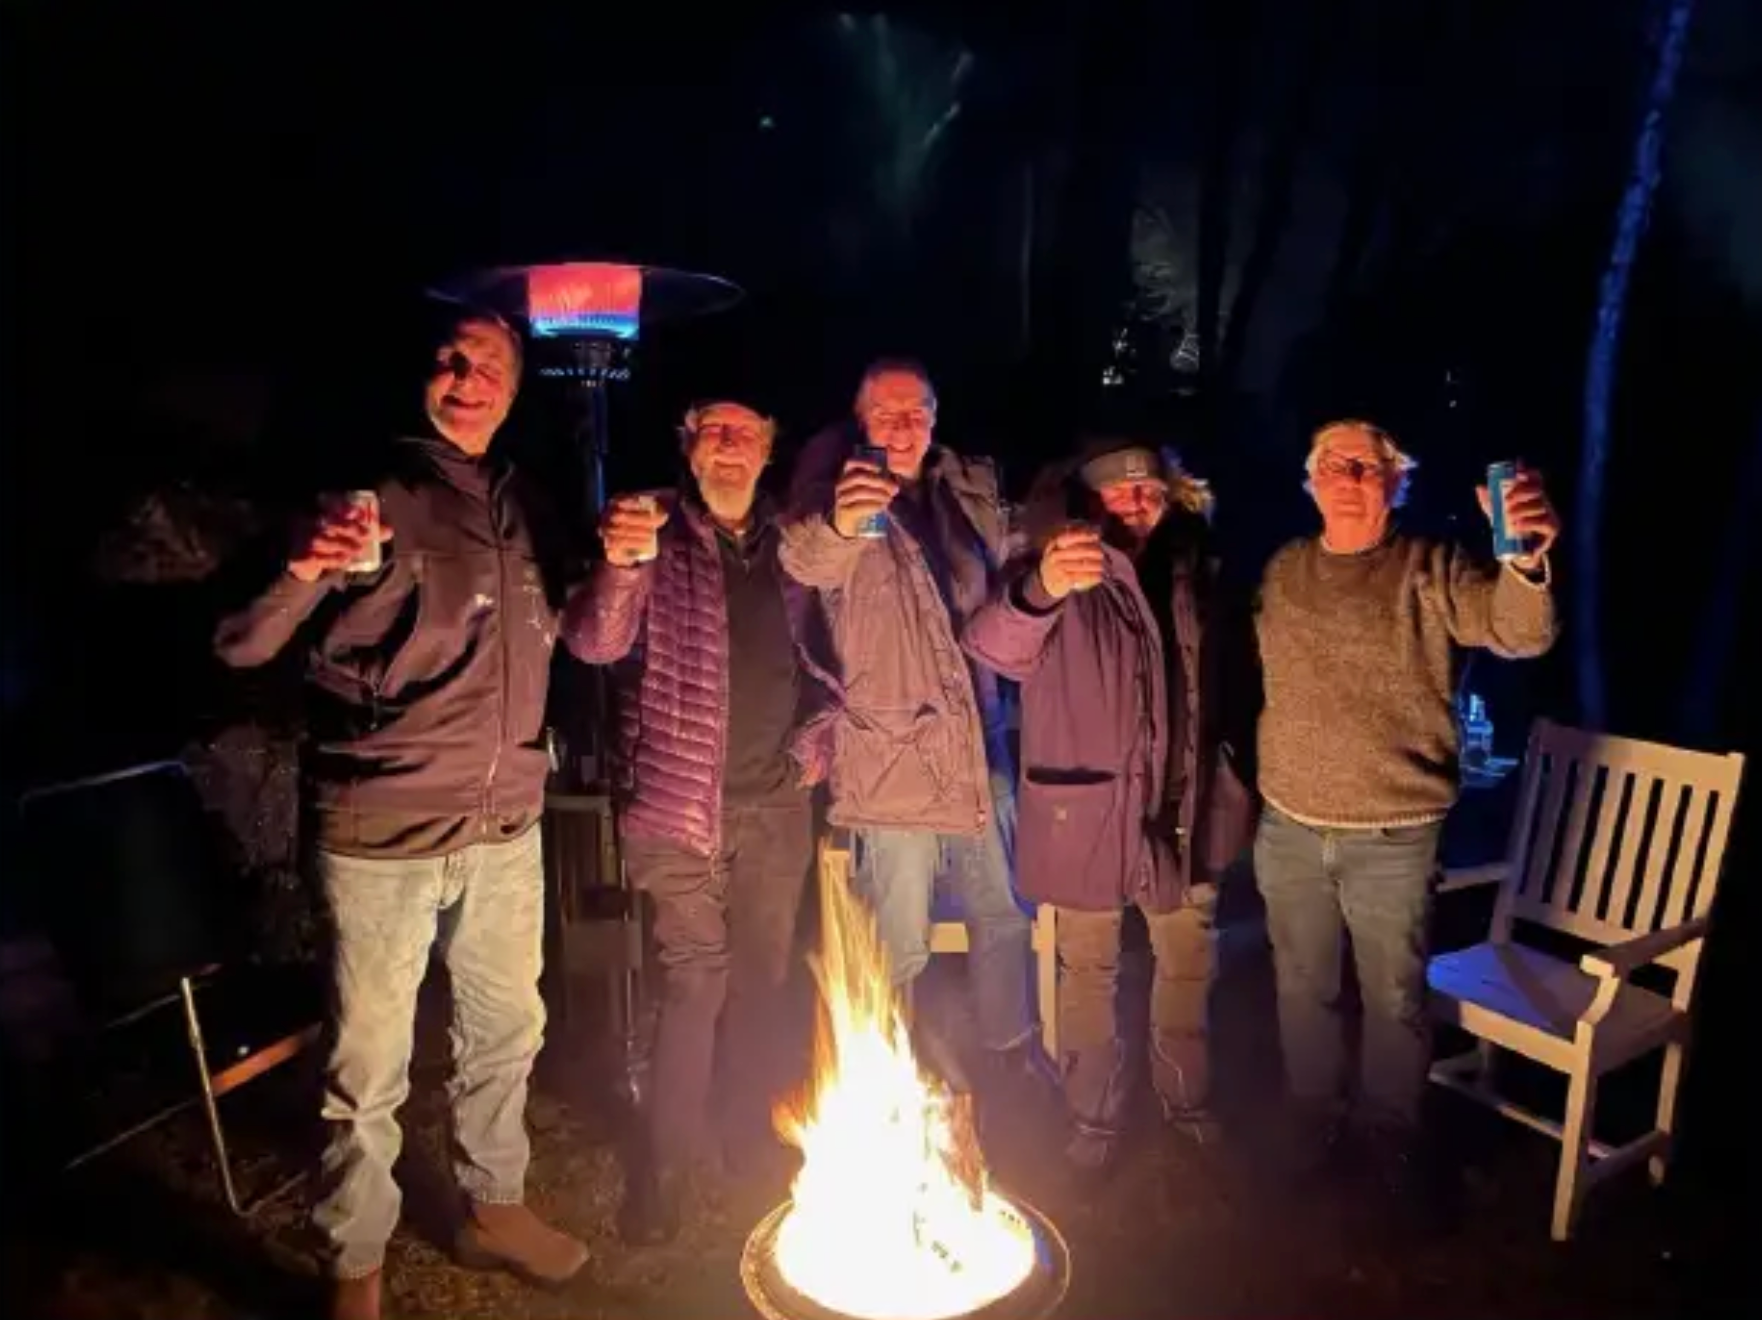 Batch 22 and the Fire Pit Boys